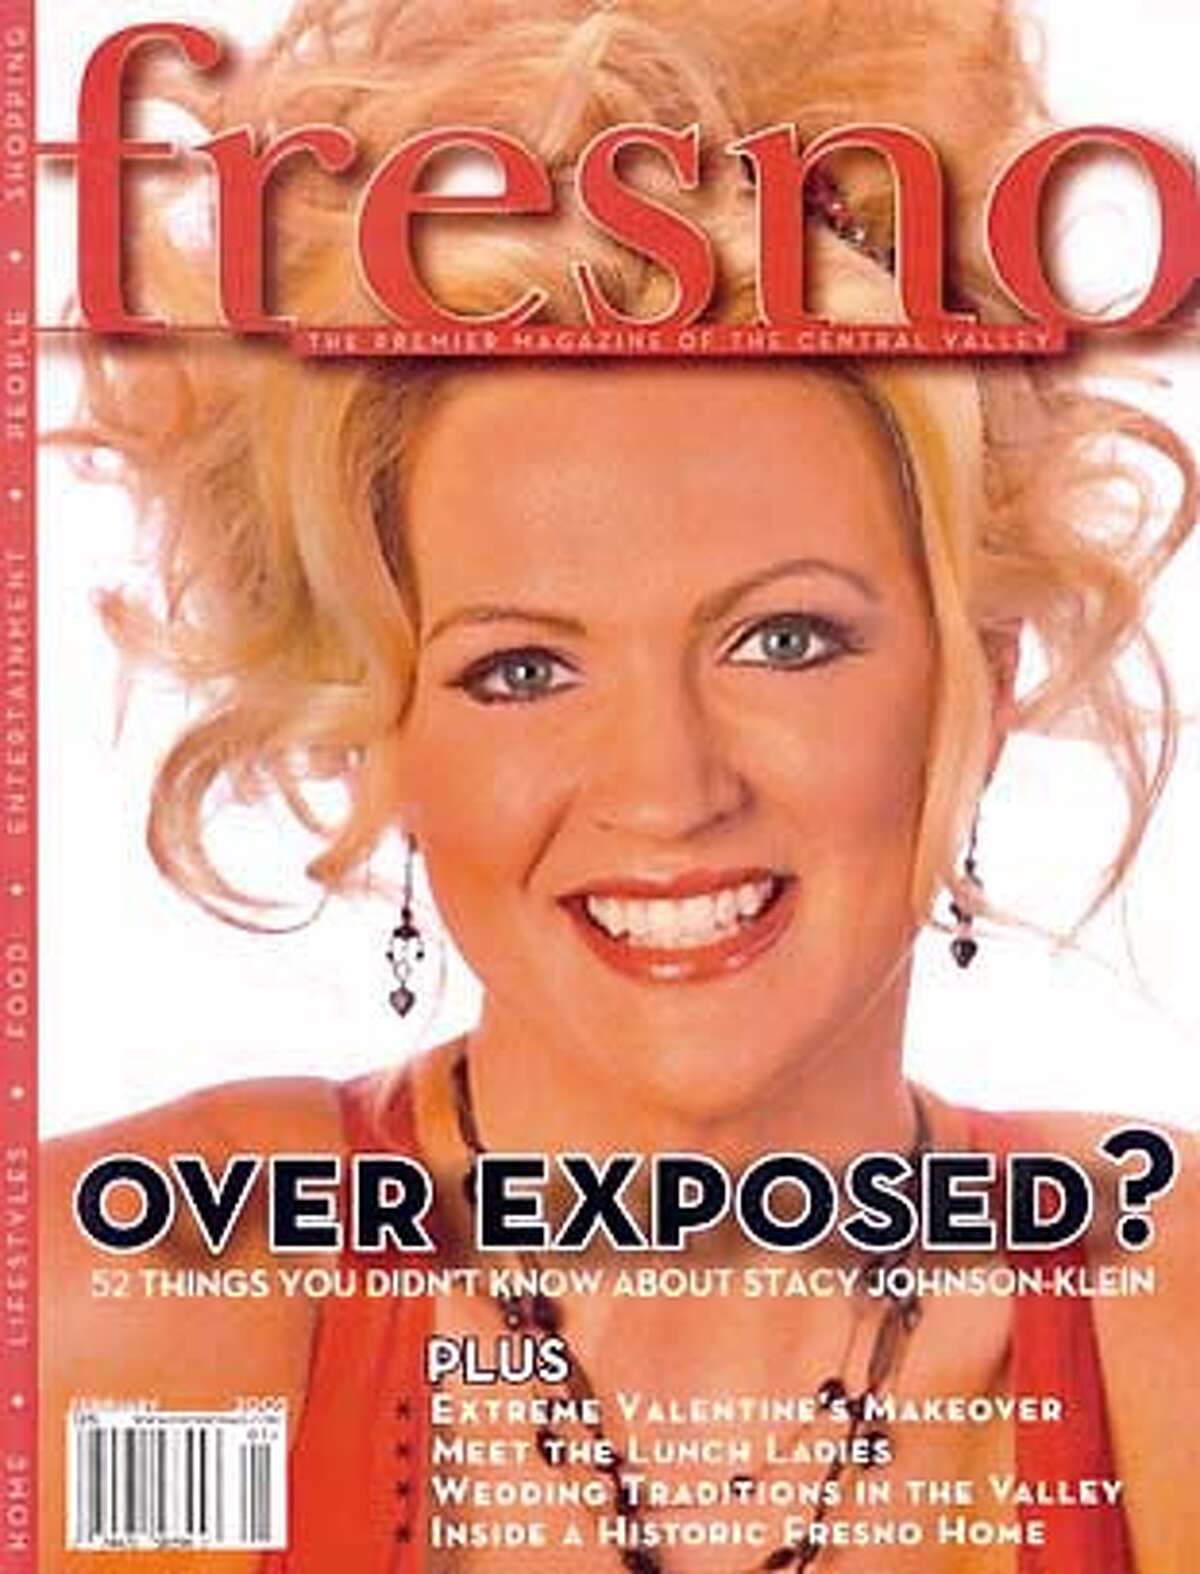 The cover of the January 2005 Fresno magazine, featuring a photo of California State University, Fresno Women's basketball coach Stacy Johnson-Klein, is shown in this scanned image.